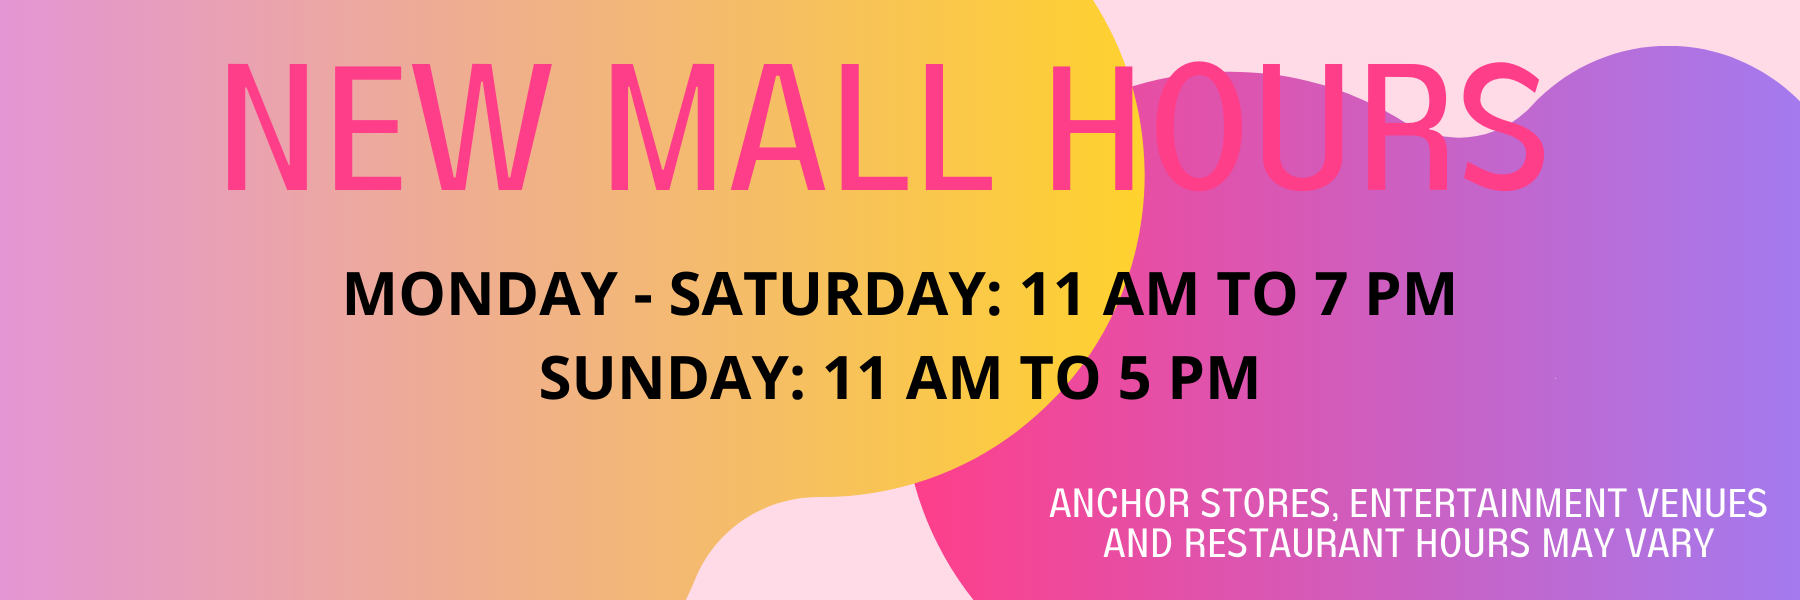 NEW MALL HOURS 1